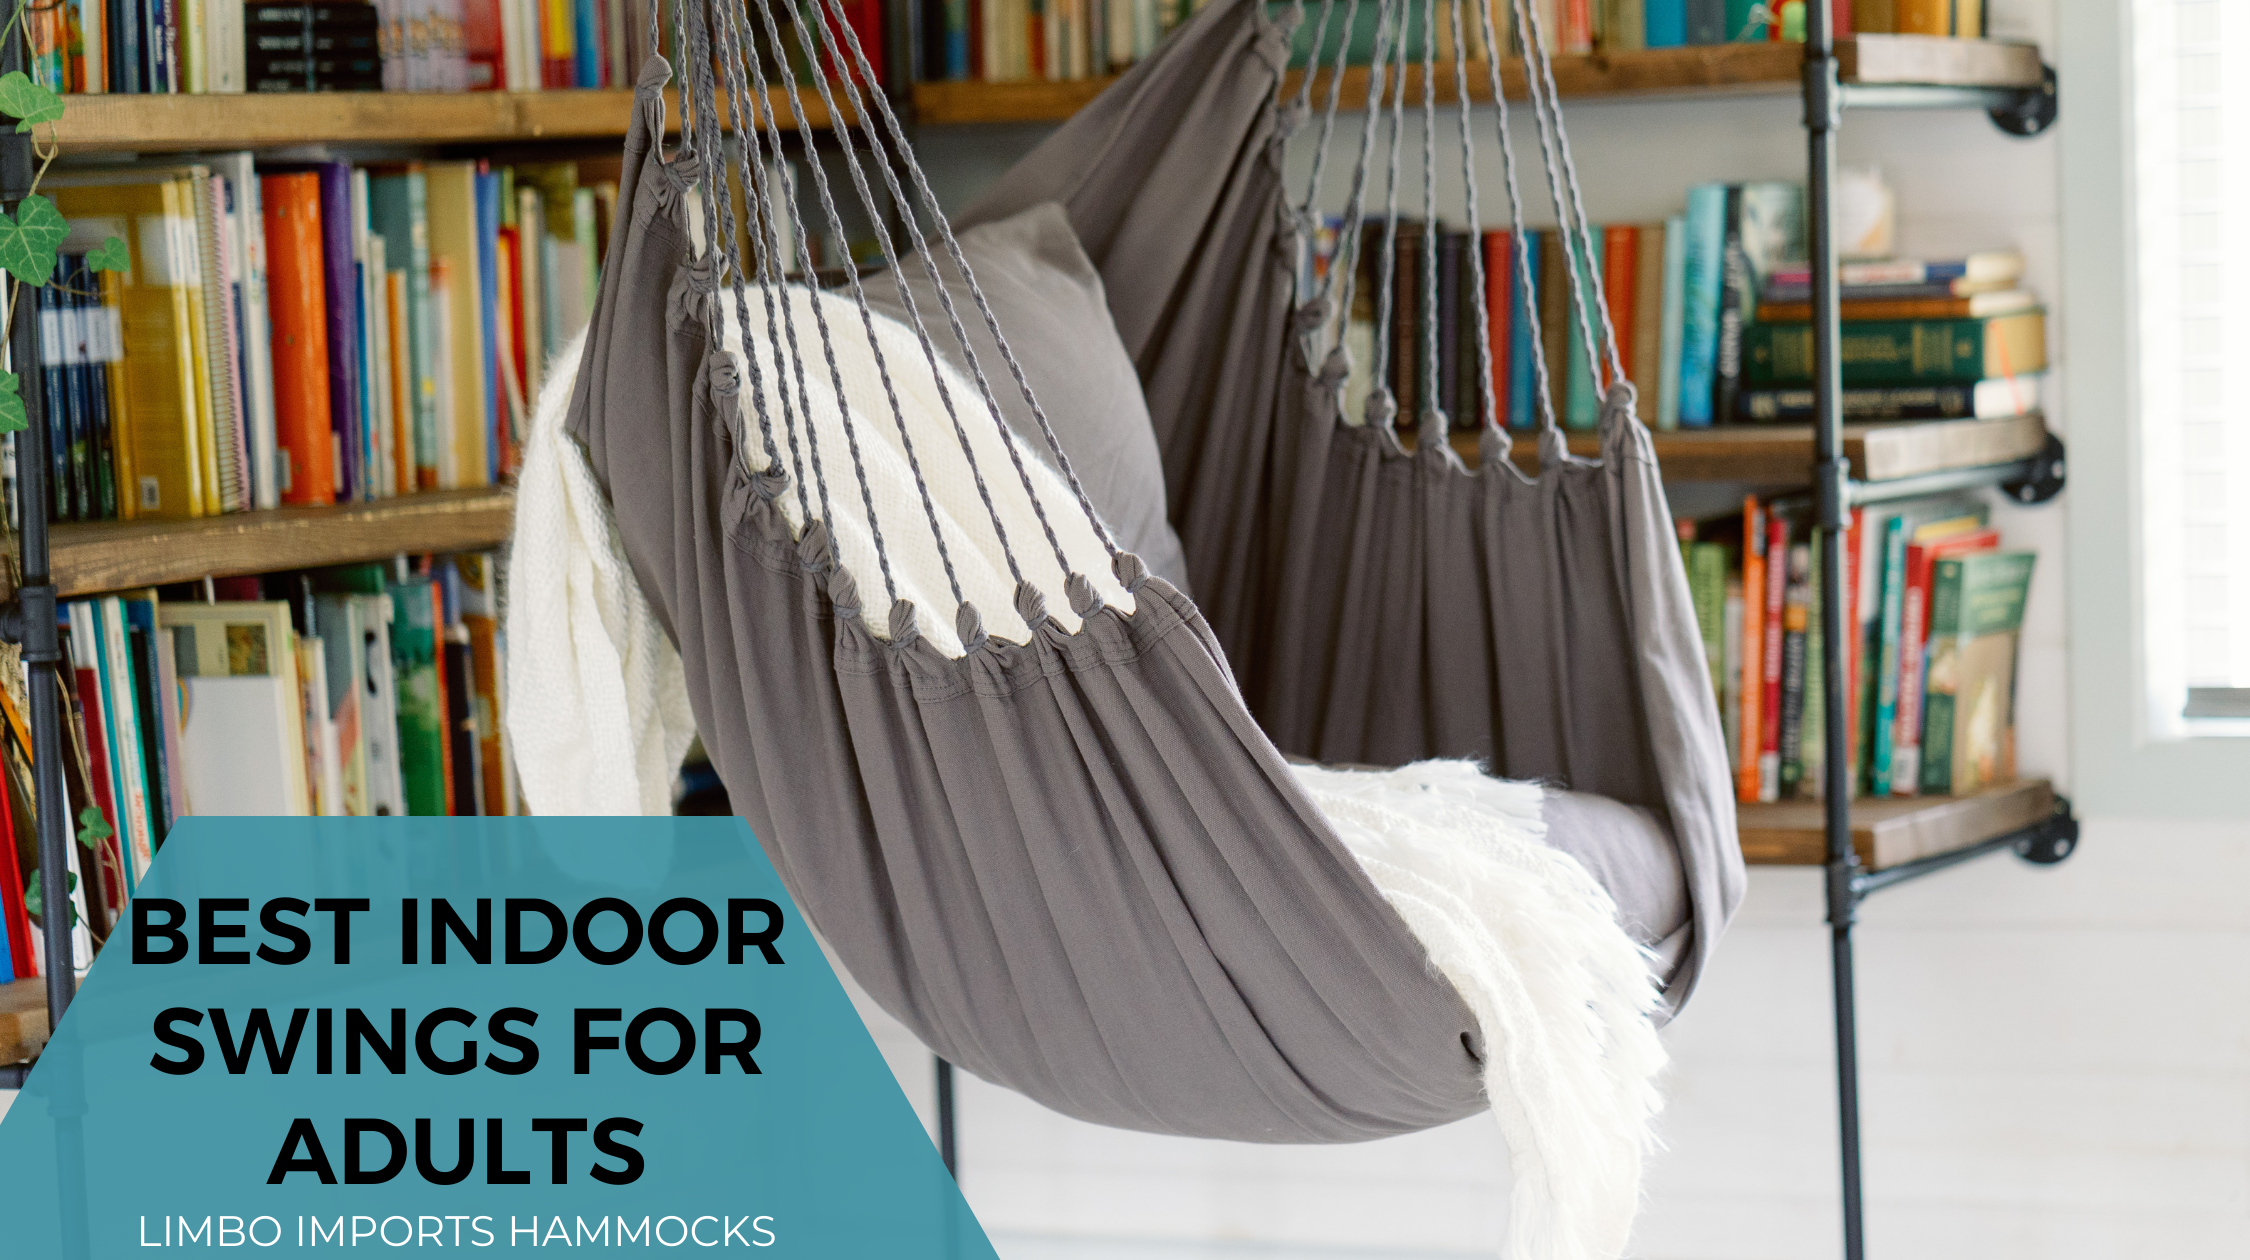 The best indoor swings for adults